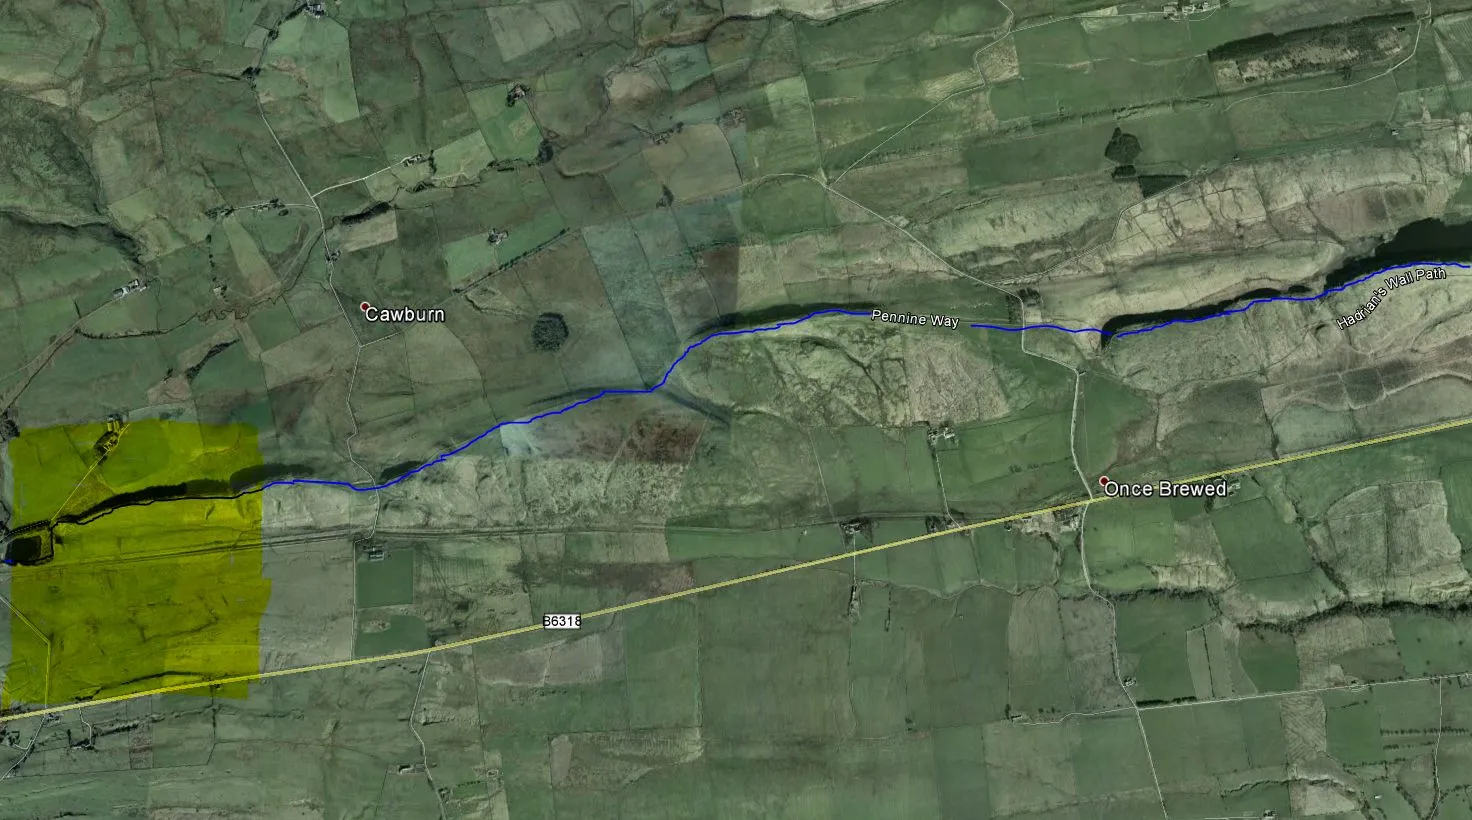 Hadrian's Wall plotted in Google Earth satellite imagery